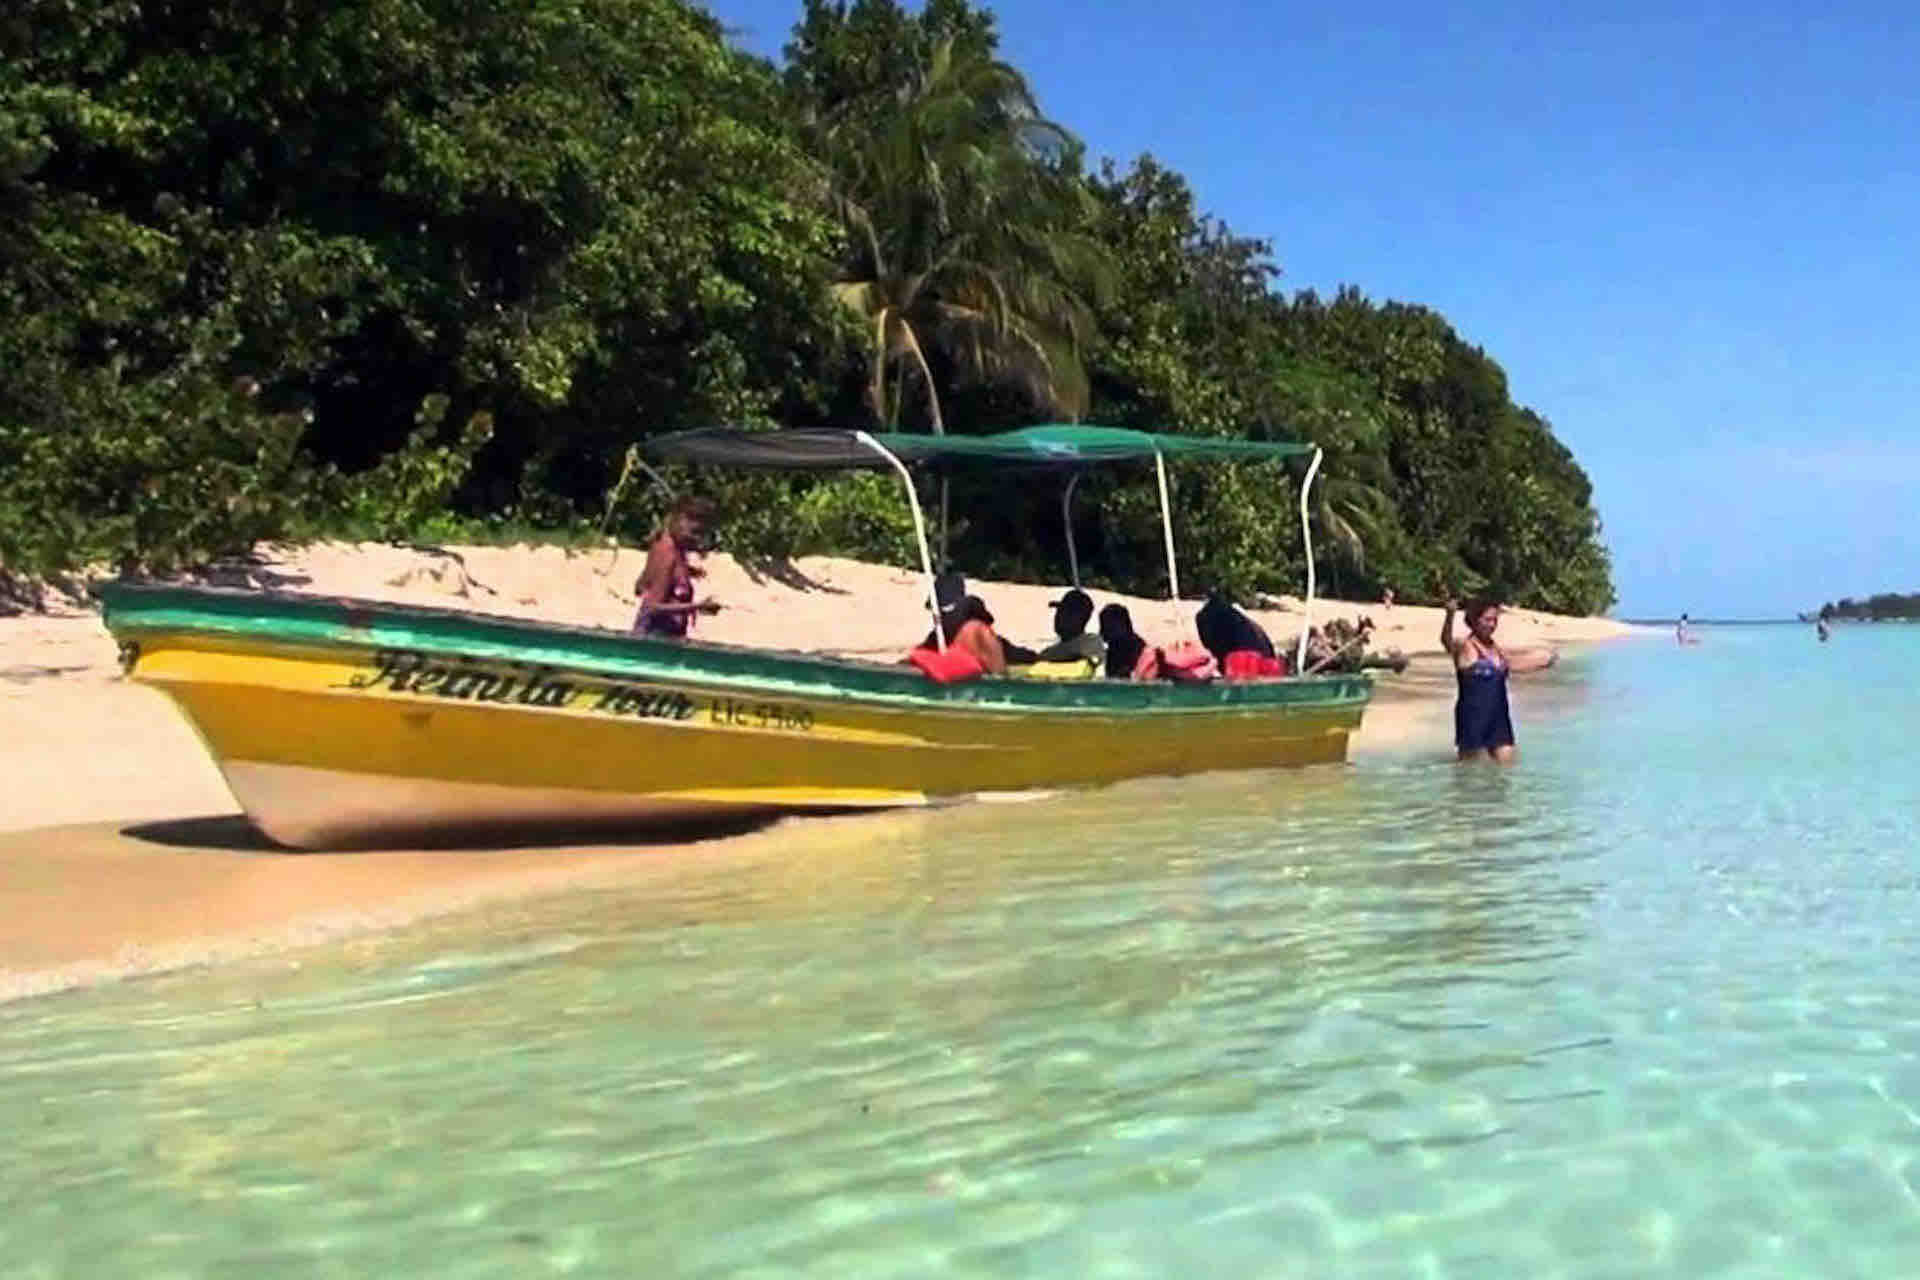 bocas del toro zapatilla island hopping tour beach with lancha boat and guests